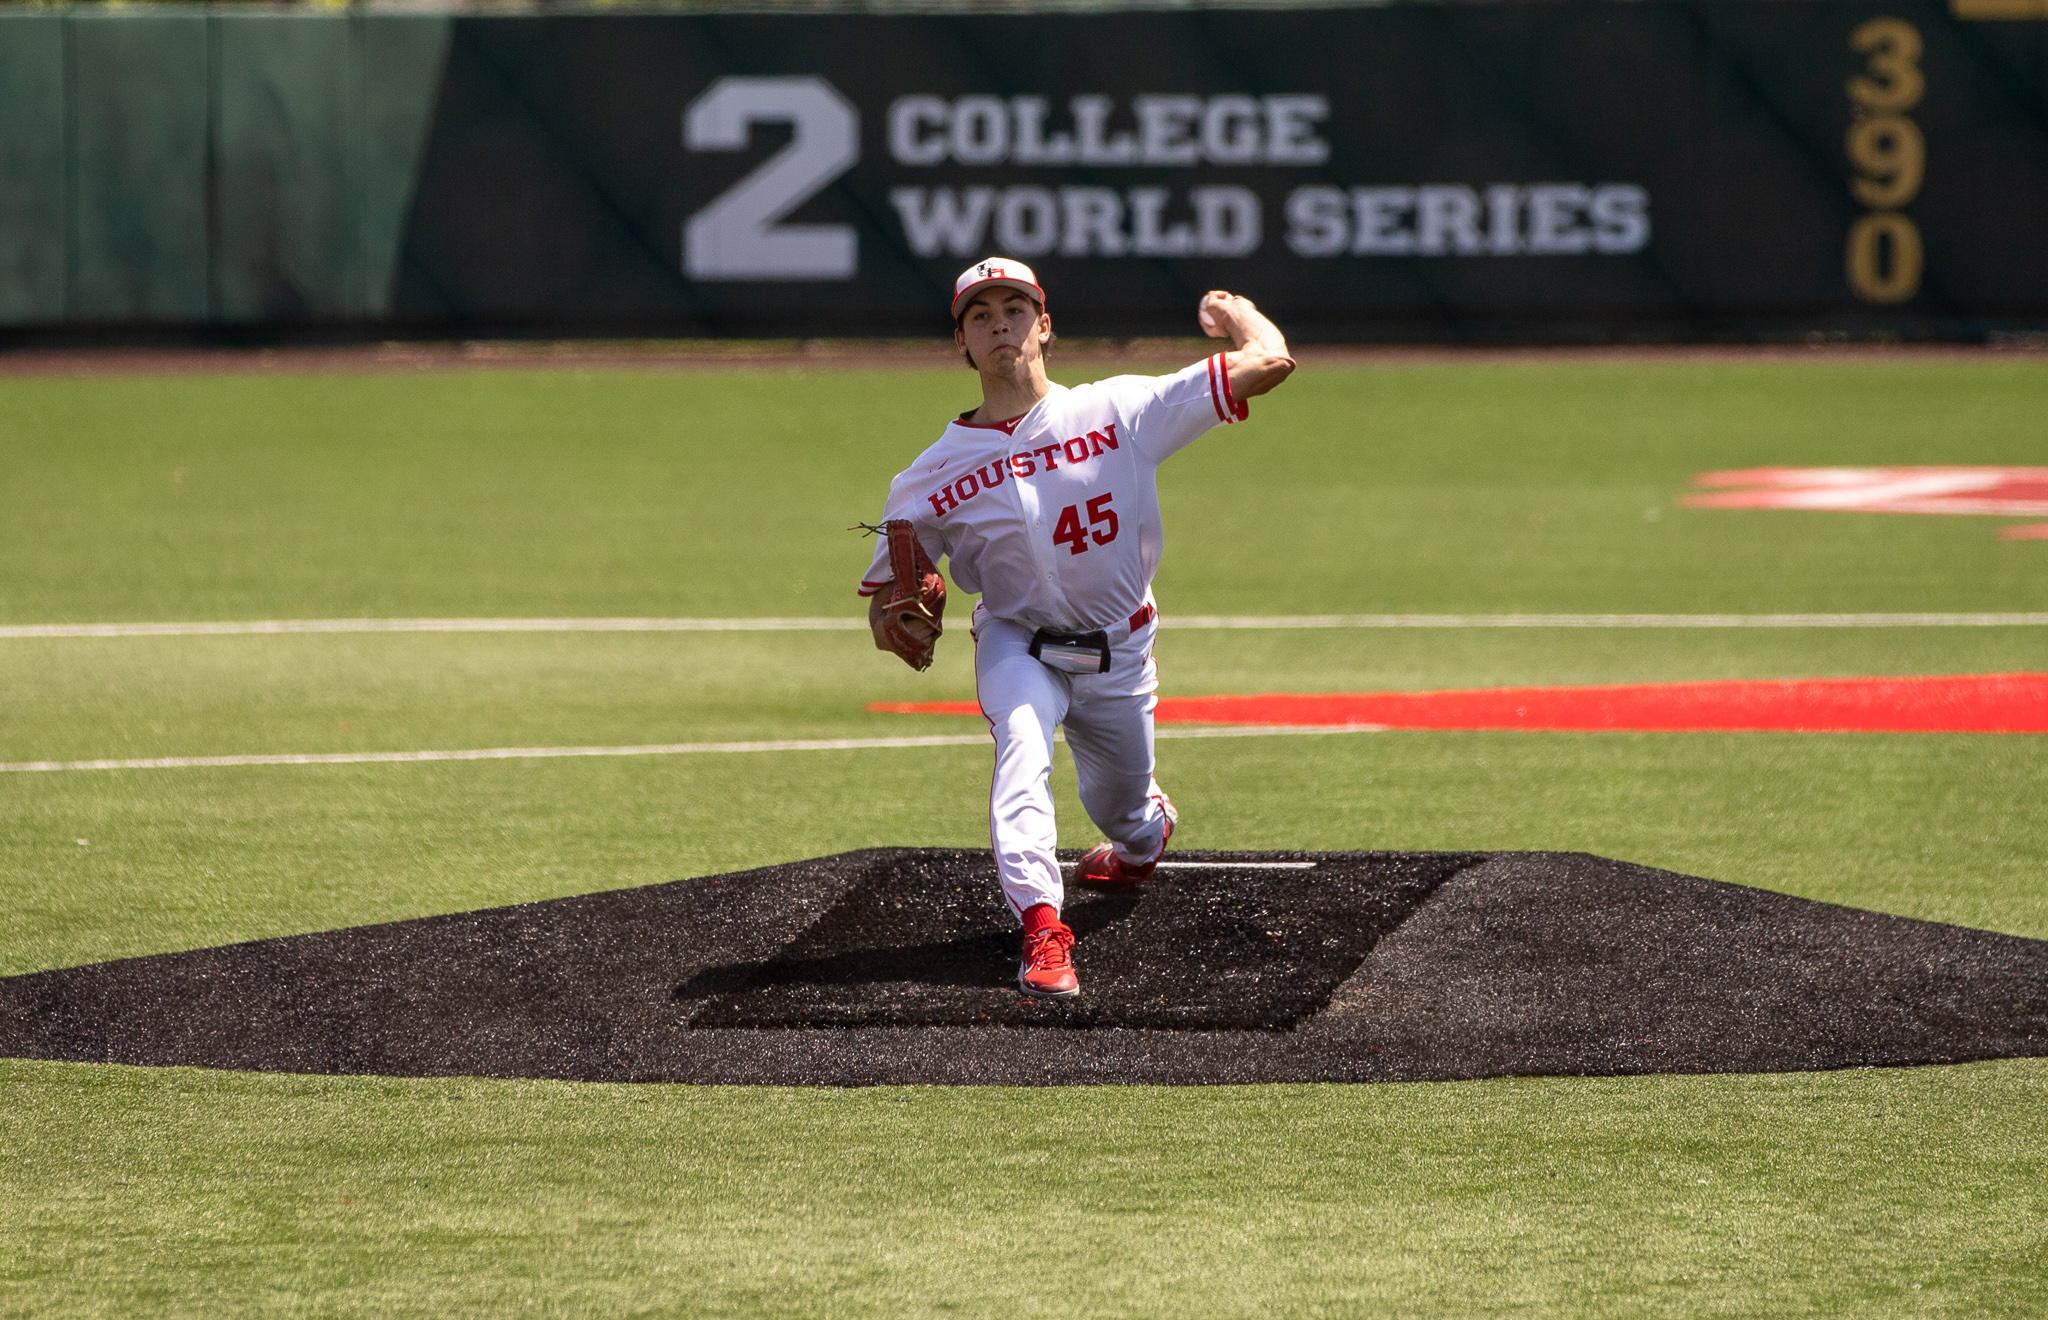 Robert Gasser improved his draft stock in a big way over the course of the 2021 UH baseball season and is projected to go in the second round of the 2021 MLB Draft. | Andy Yanez/The Cougar